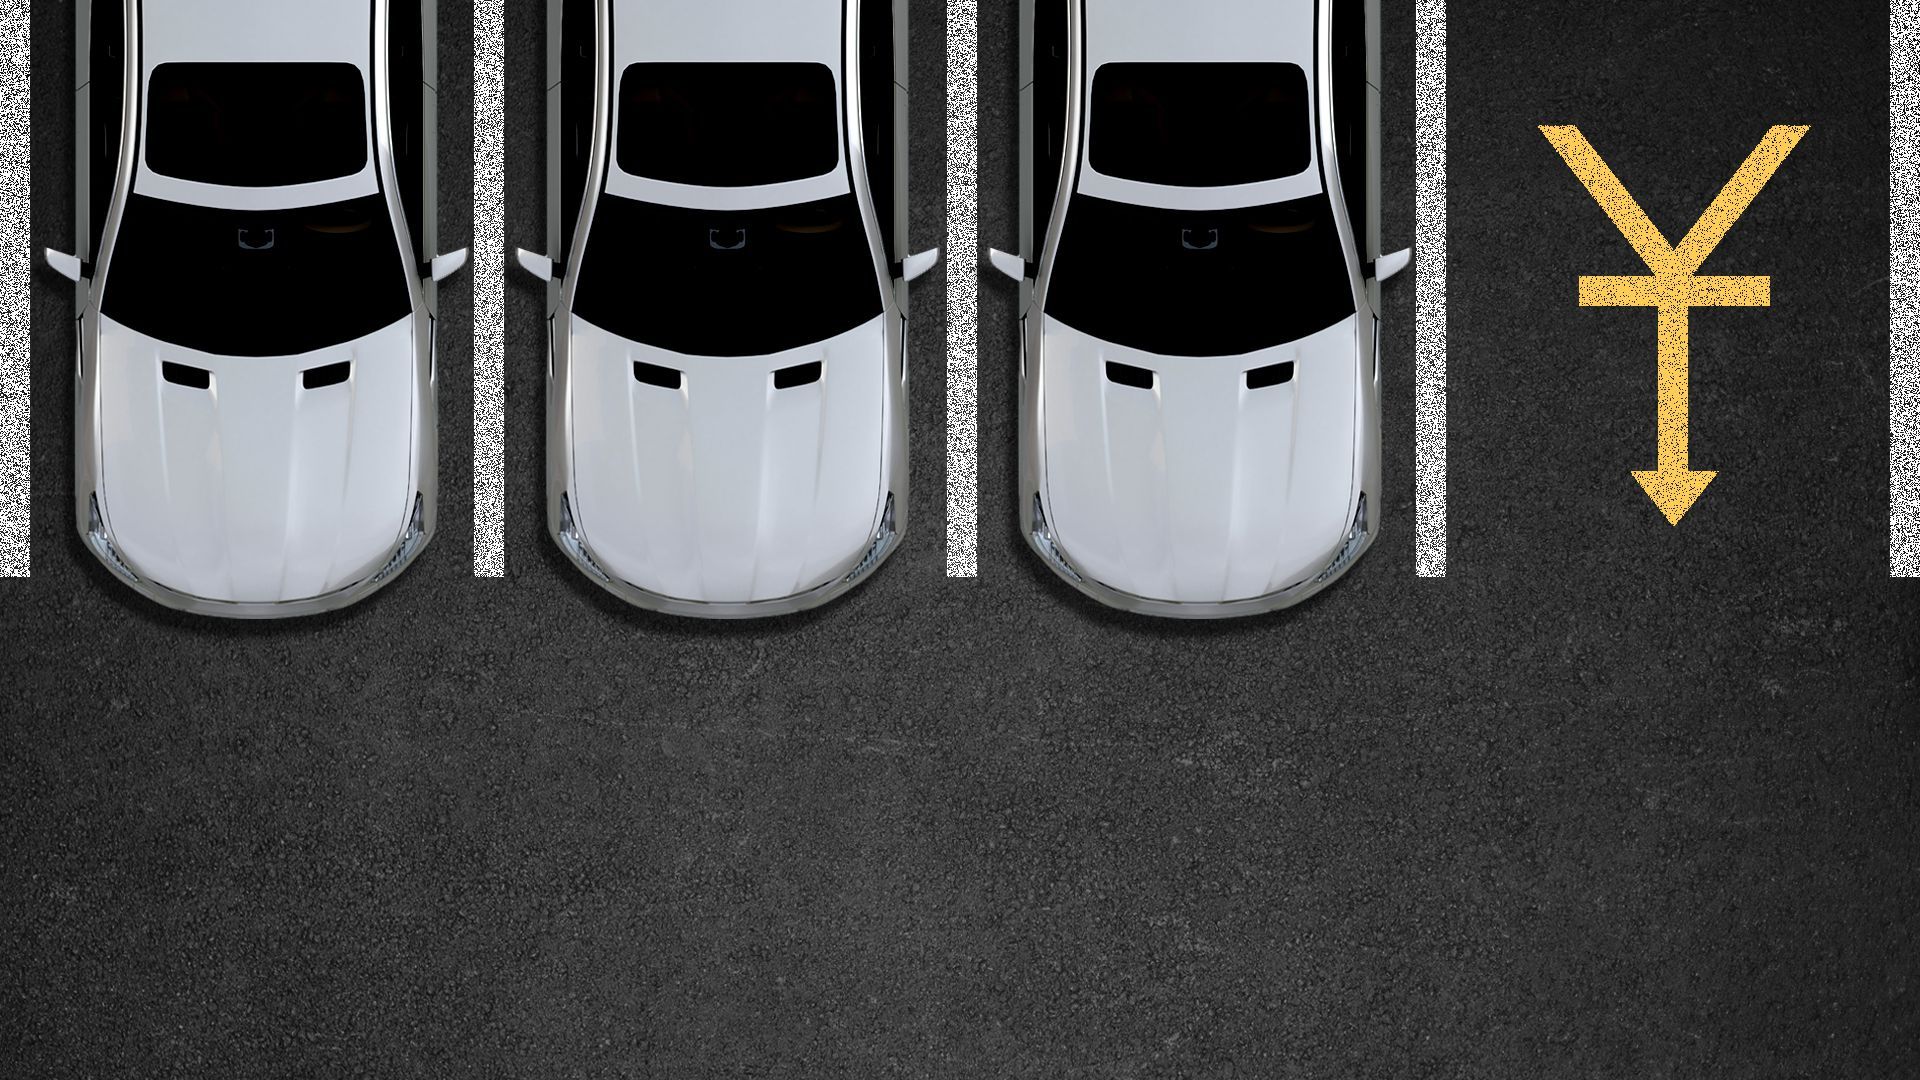 Illustration of a parking full of cars with one empty space featuring a yuan symbol with a downward arrow